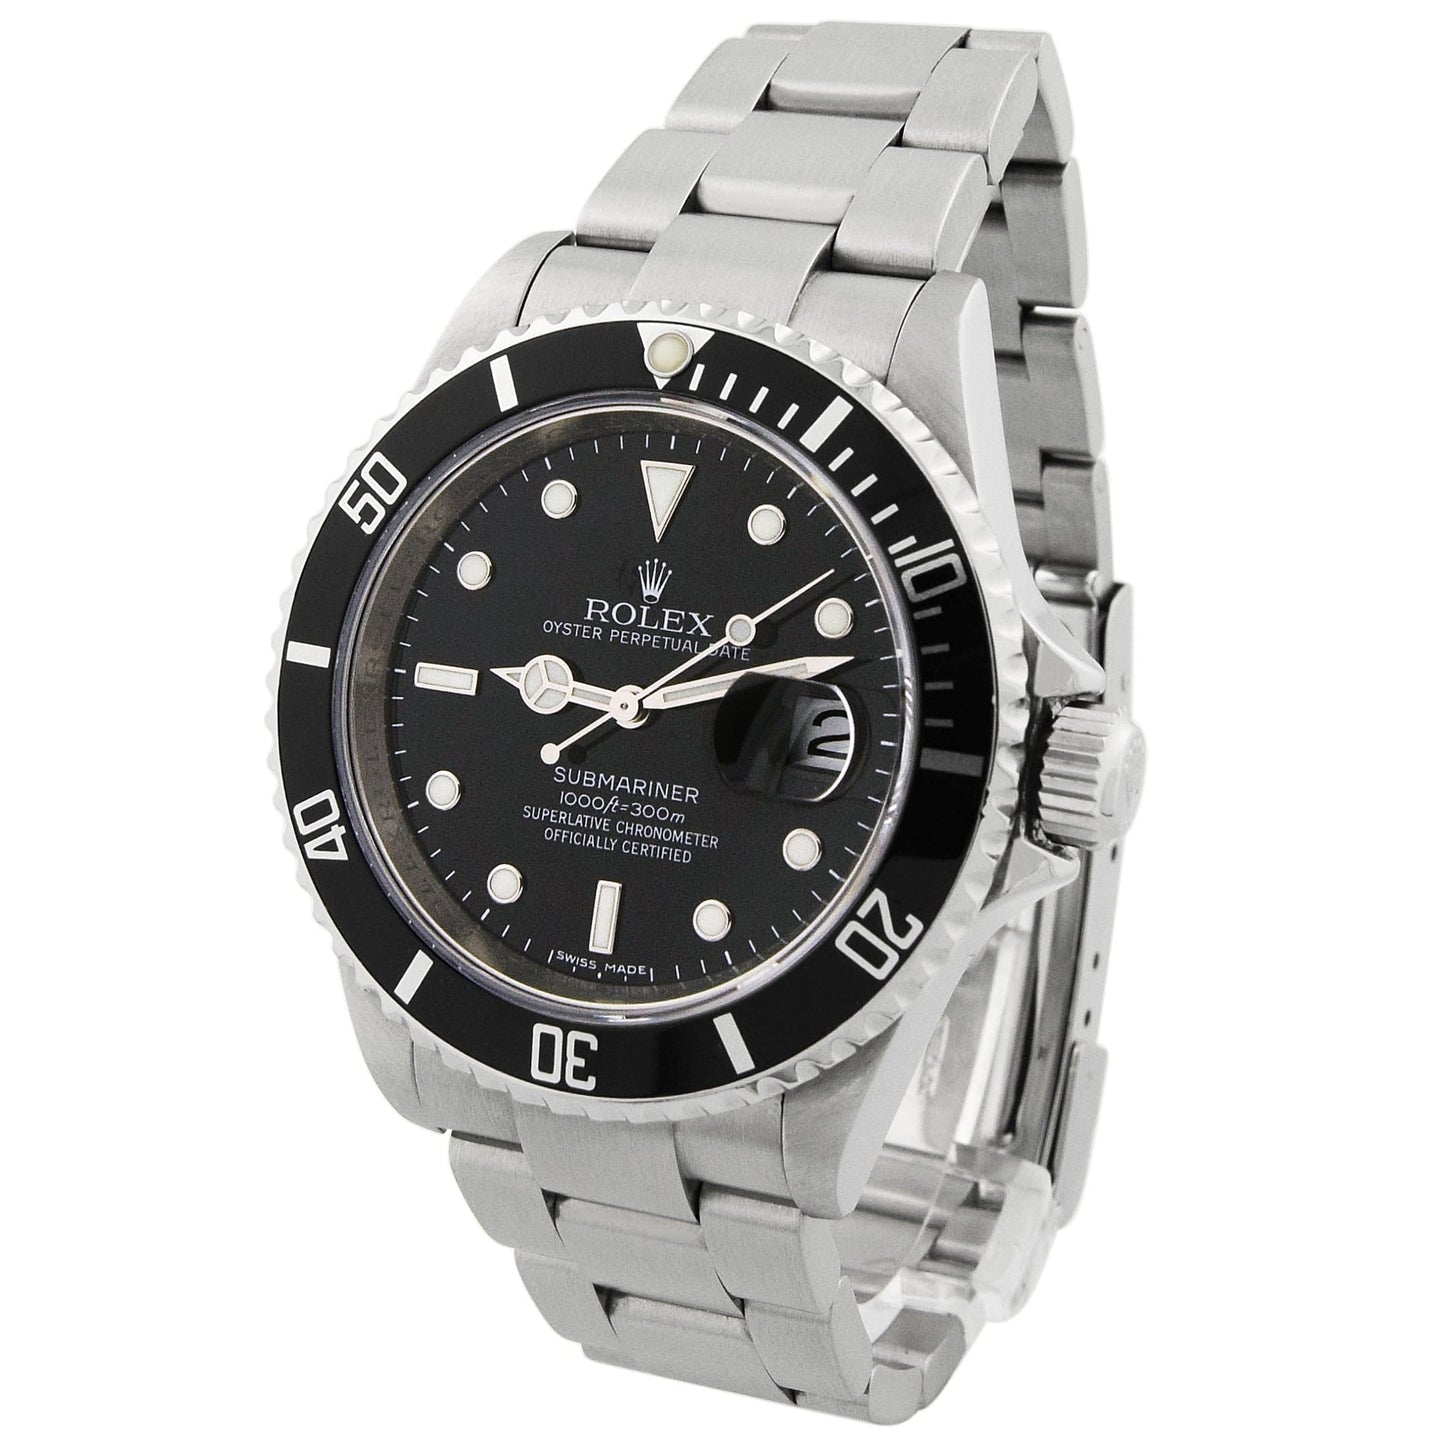 Rolex Submariner Stainless Steel 40mm Black Dot Dial Watch Reference #: 16610 - Happy Jewelers Fine Jewelry Lifetime Warranty